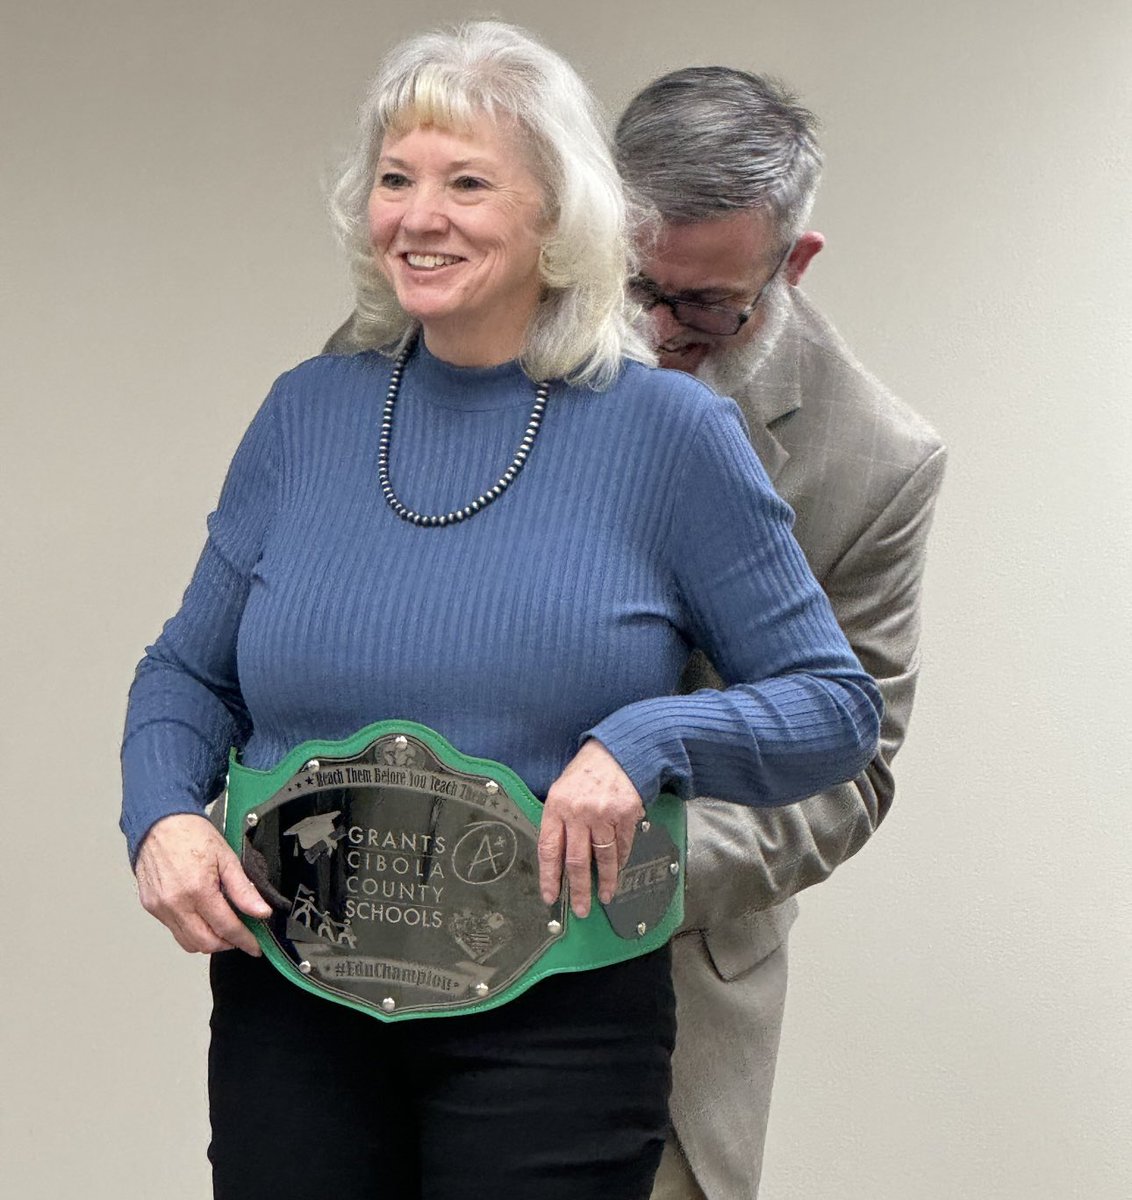 A new #EduChampion is crowned in Grants, NM! It’s the belt that keeps on giving! Brings me overwhelming joy to see these #EduChampion belts are bringing smiles & celebrations to educators around the nation long after my visit. Let’s build each other up more often in this field!